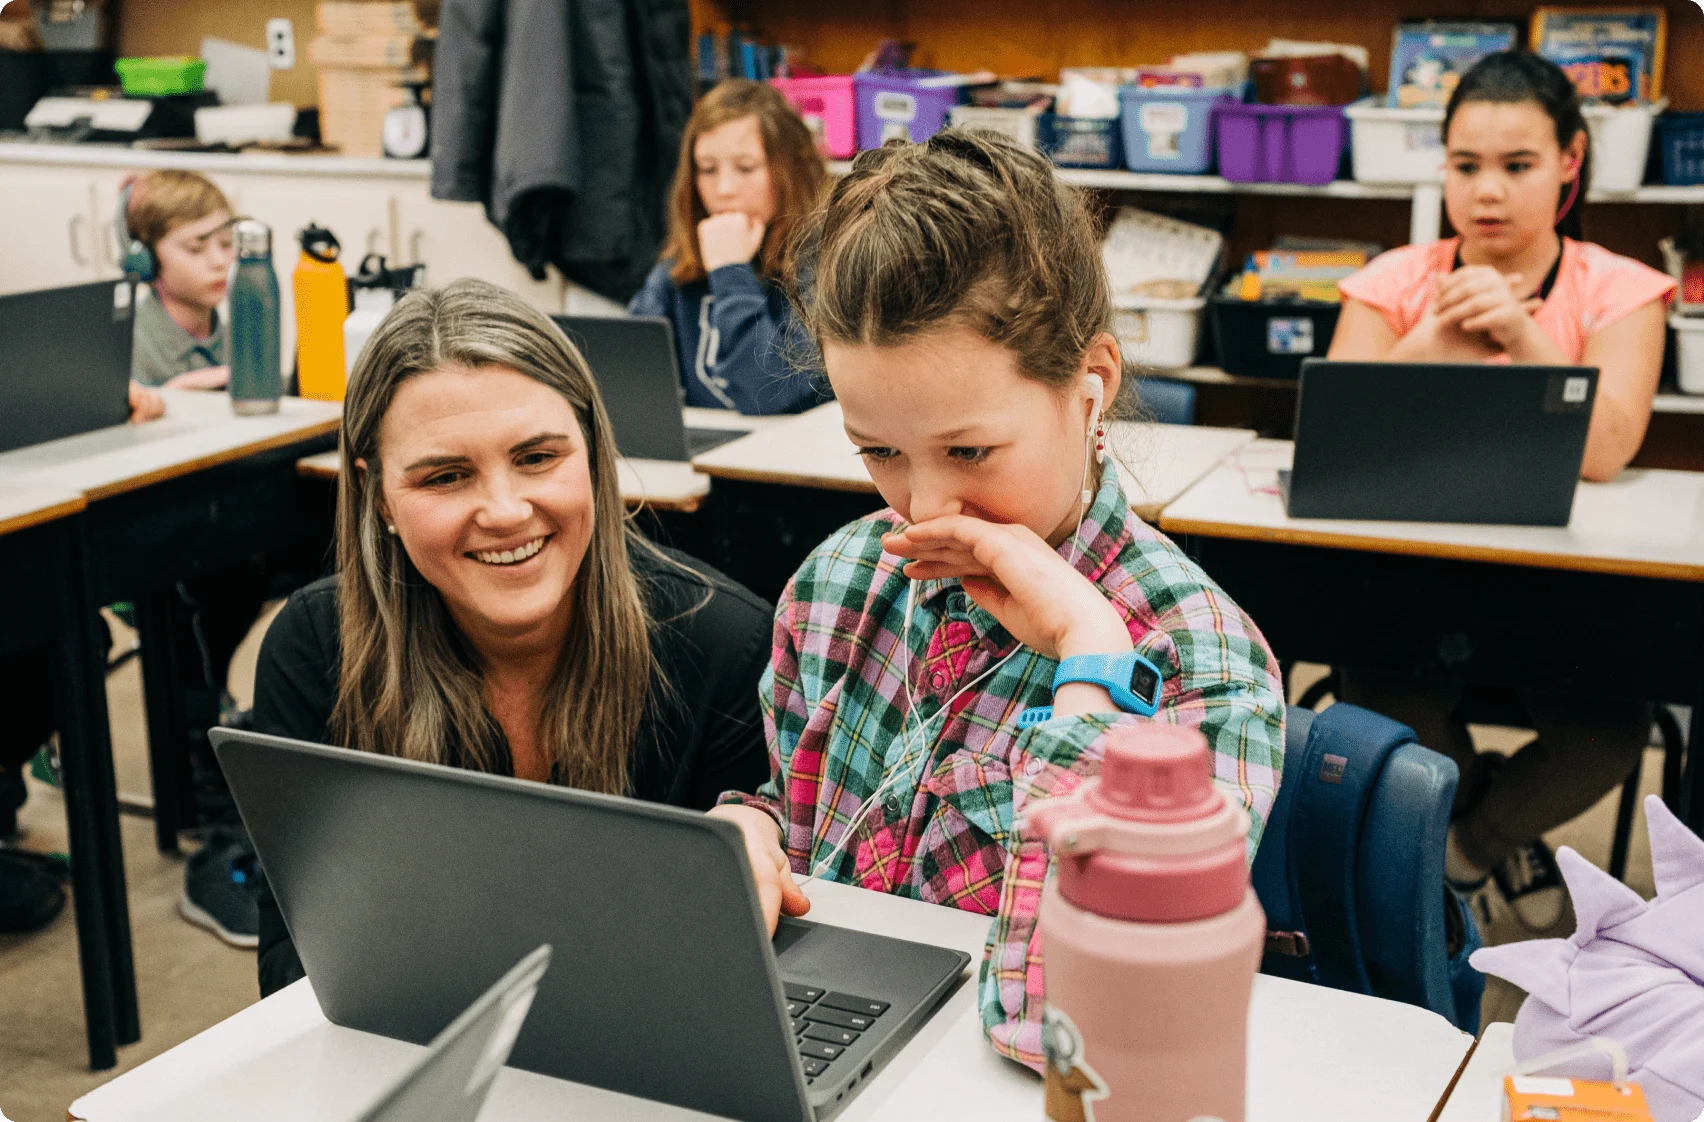 Julia Rivard Dexter, founder of Shoelace, smiling next to one of her students while they play a game on their laptop.